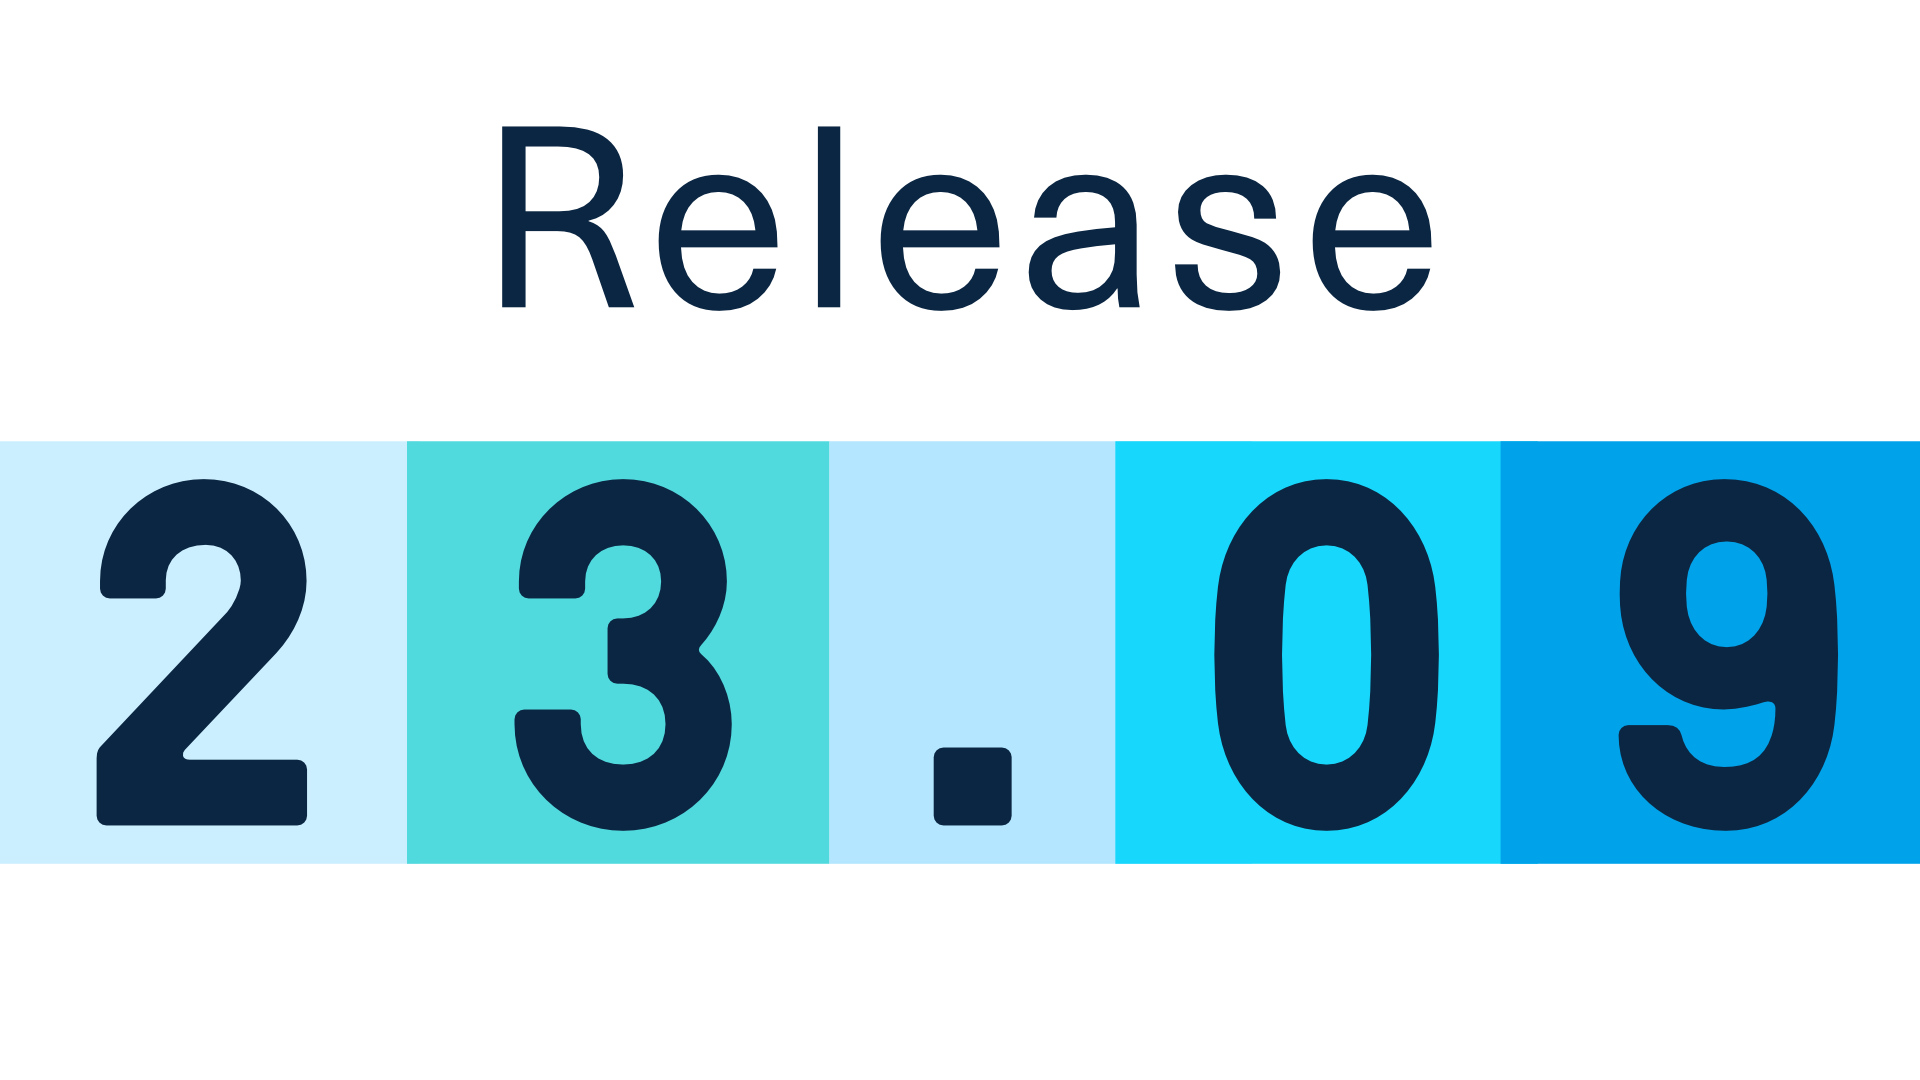 Release 23.09